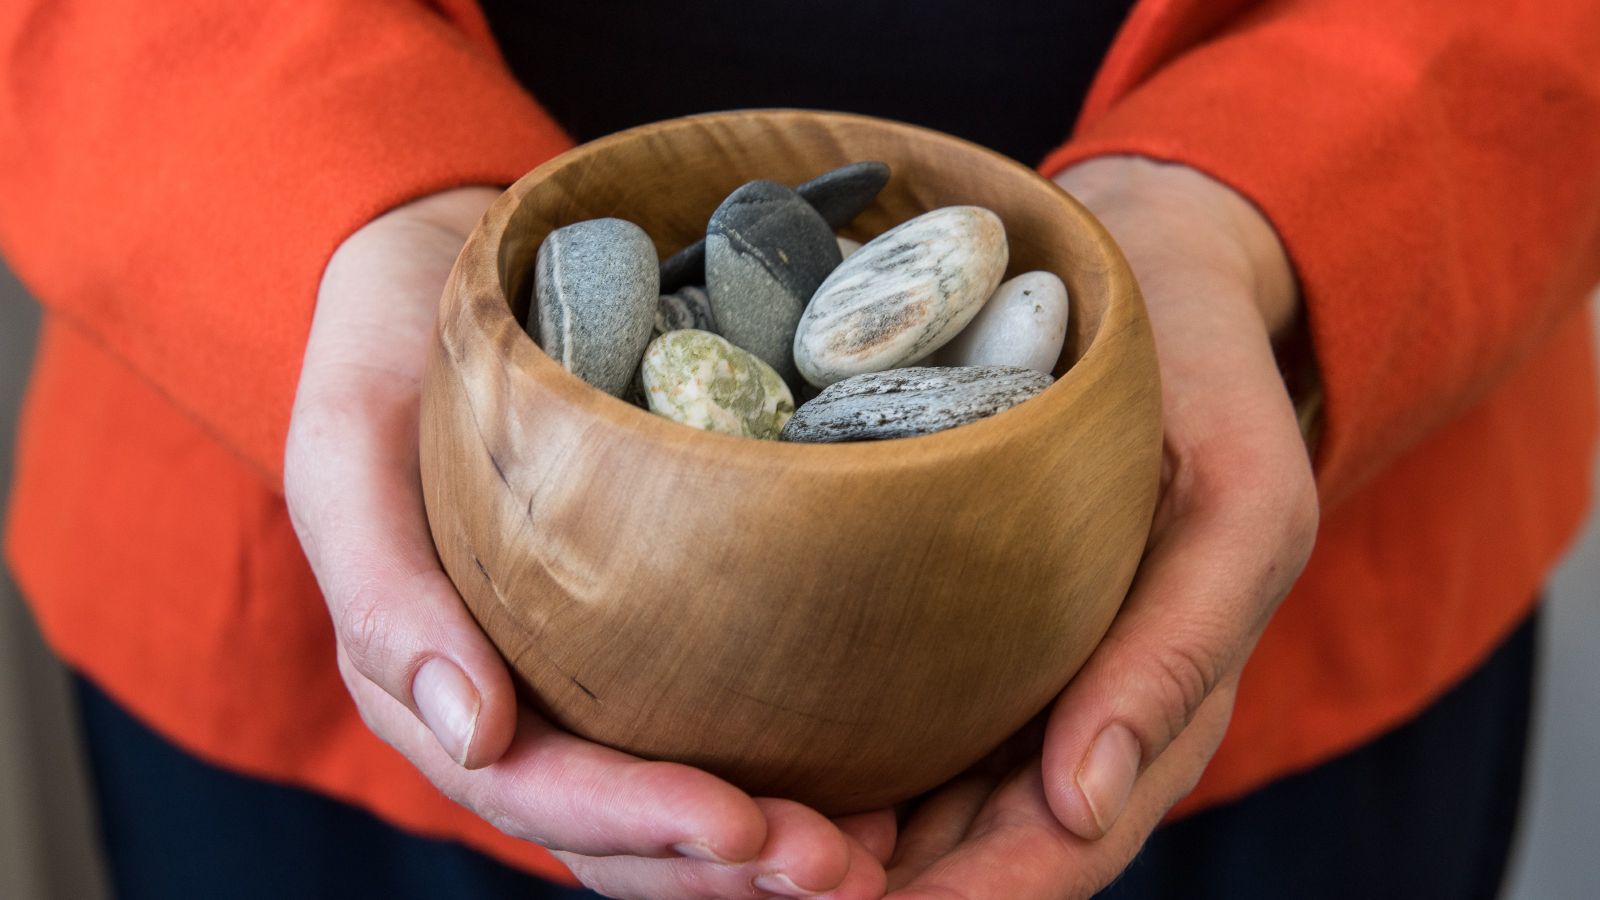 Two hands holding a wooden bowl with rocks inside.